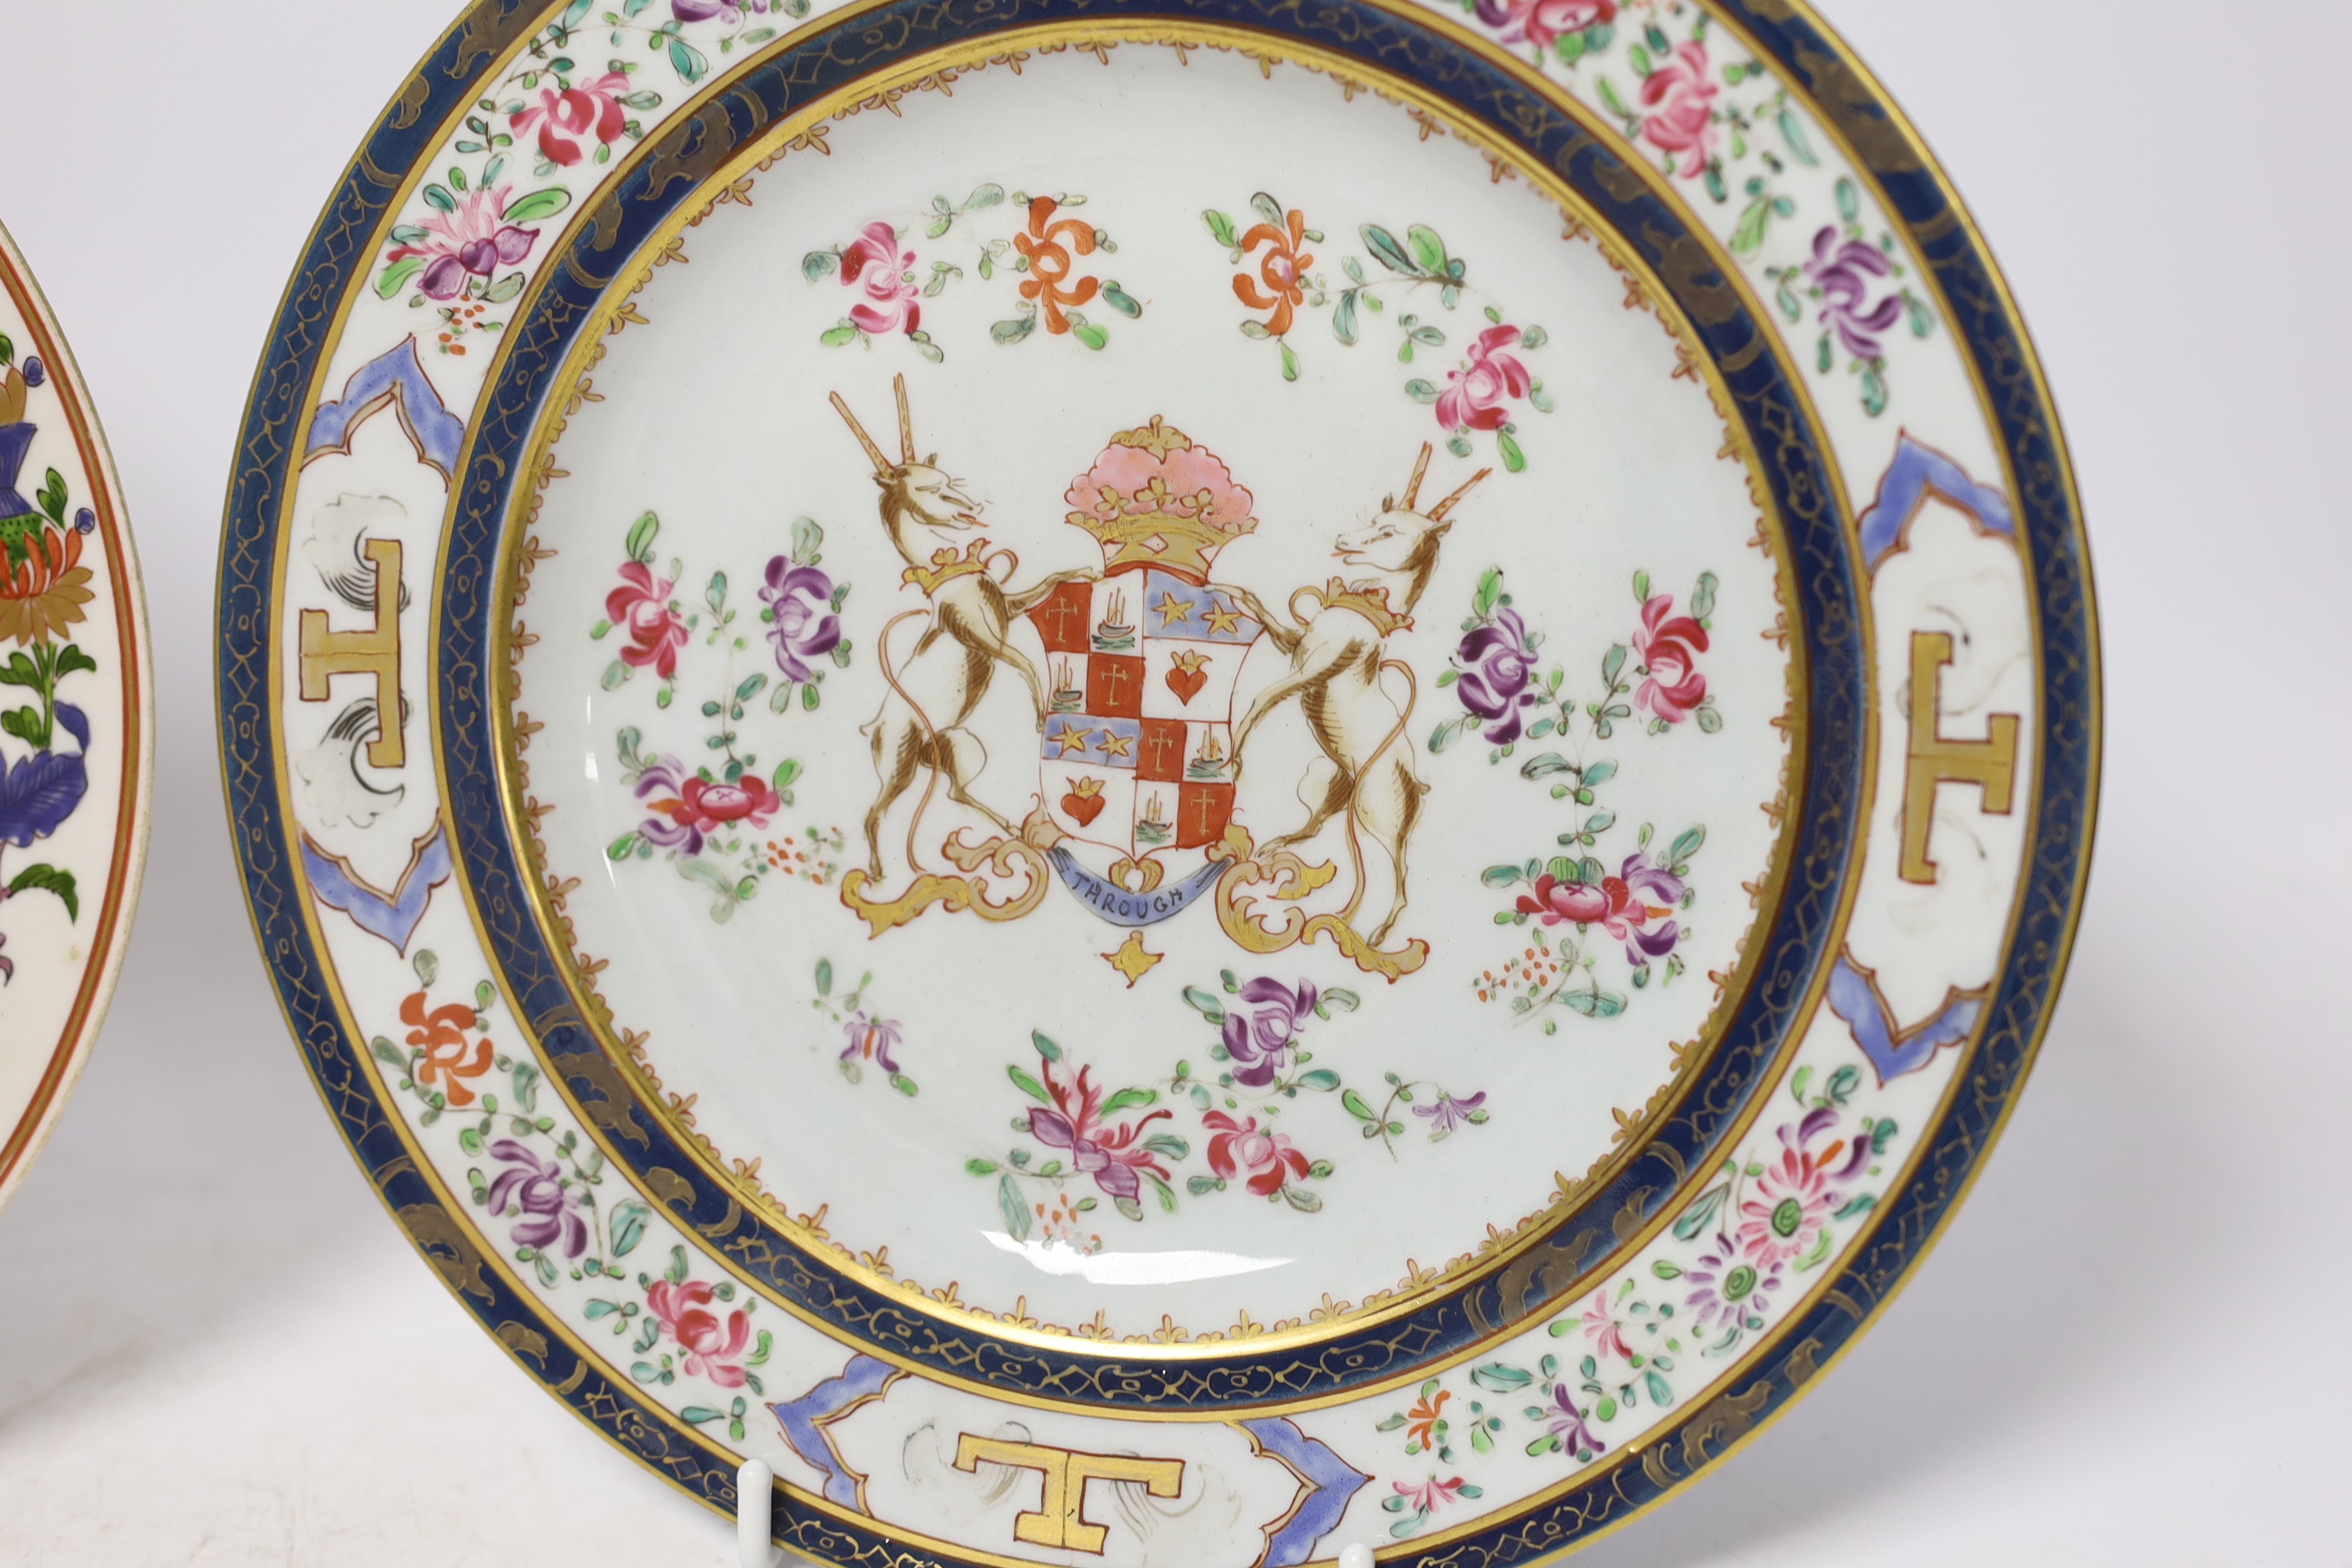 Two Samson of Paris famille rose style dishes, painted with European armorials, largest 24cm diameter (2). Condition - good, some wear to decoration